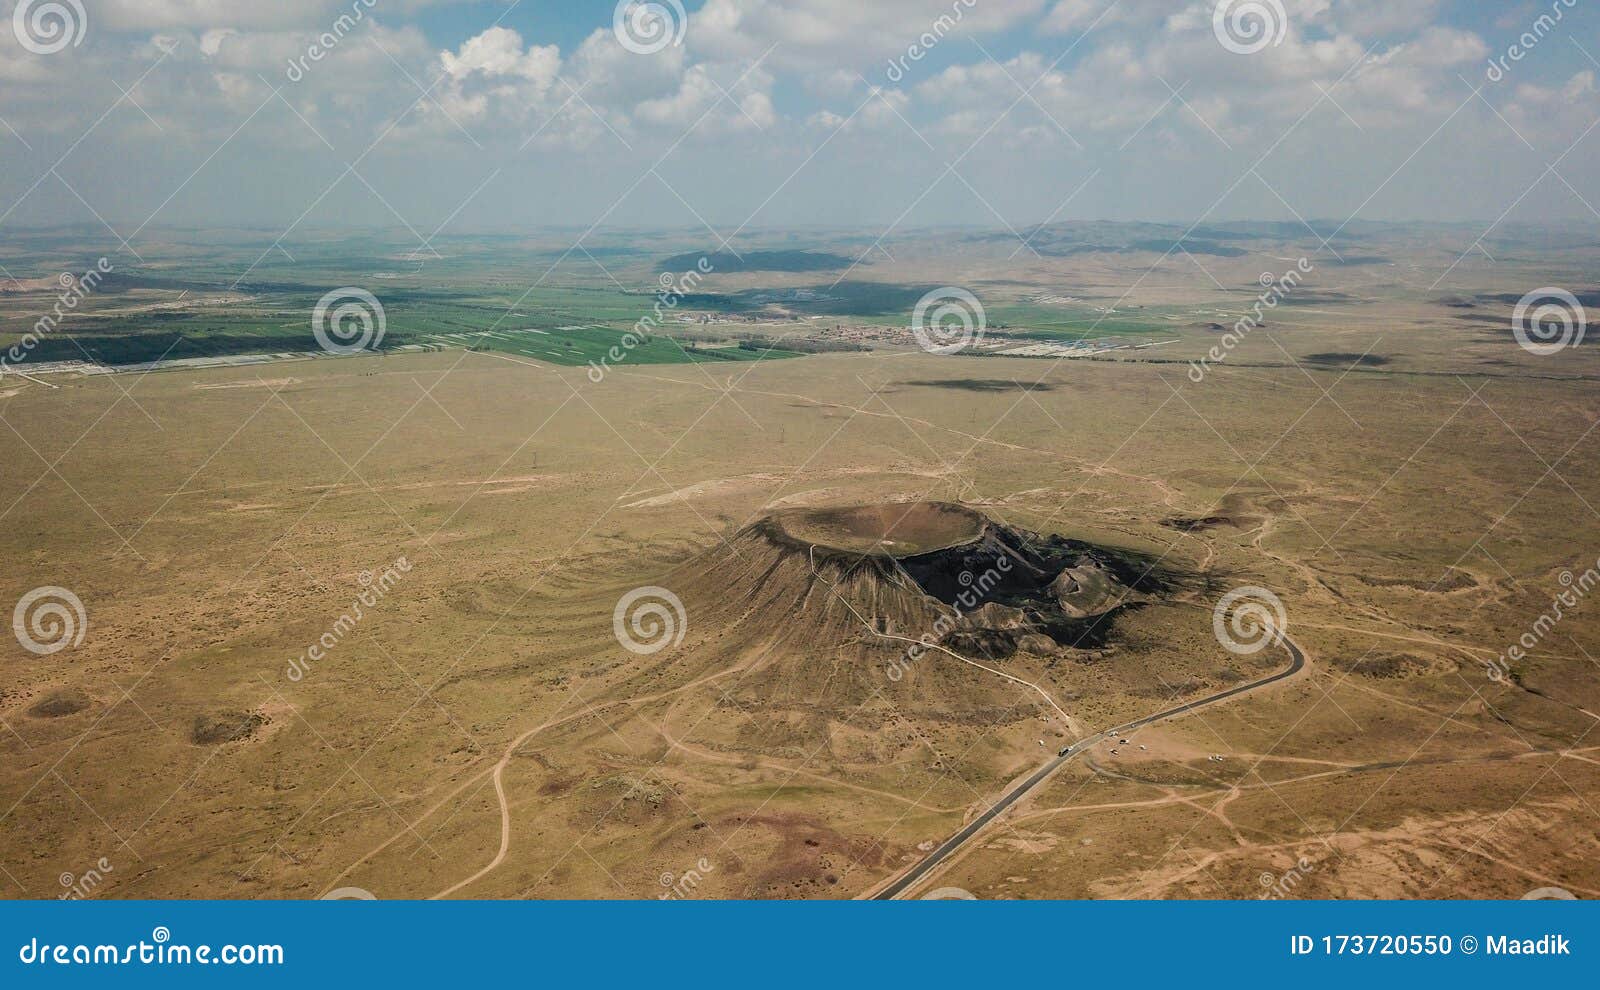 aerial photography of natural scenery of ulan hada volcano group chahar volcano group in inner mongolia, china